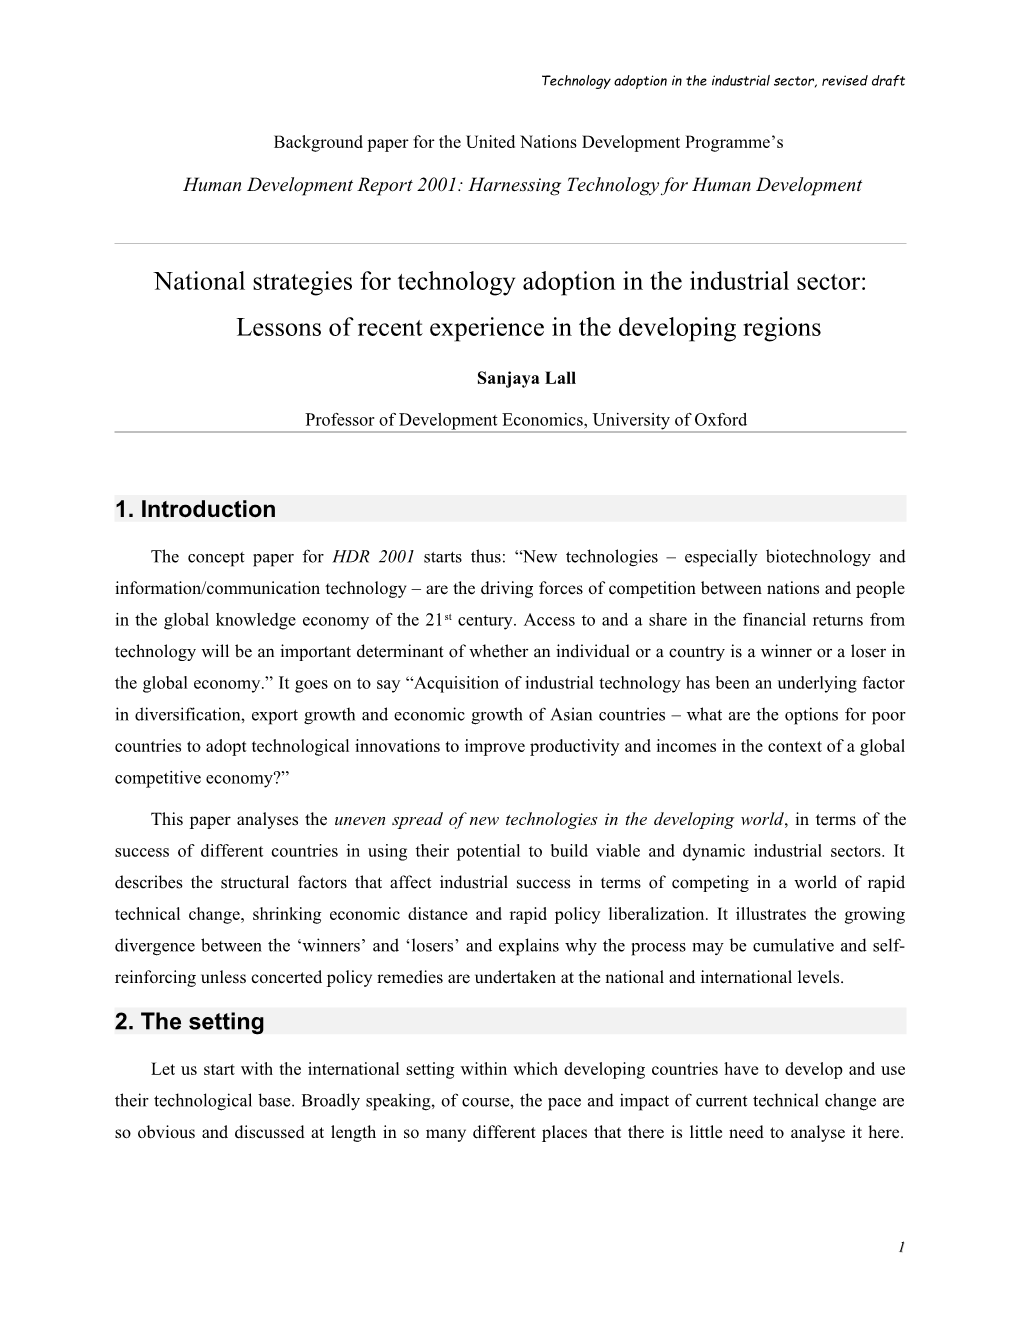 Technology and Human Development: Concept Paper on Industrial Technology